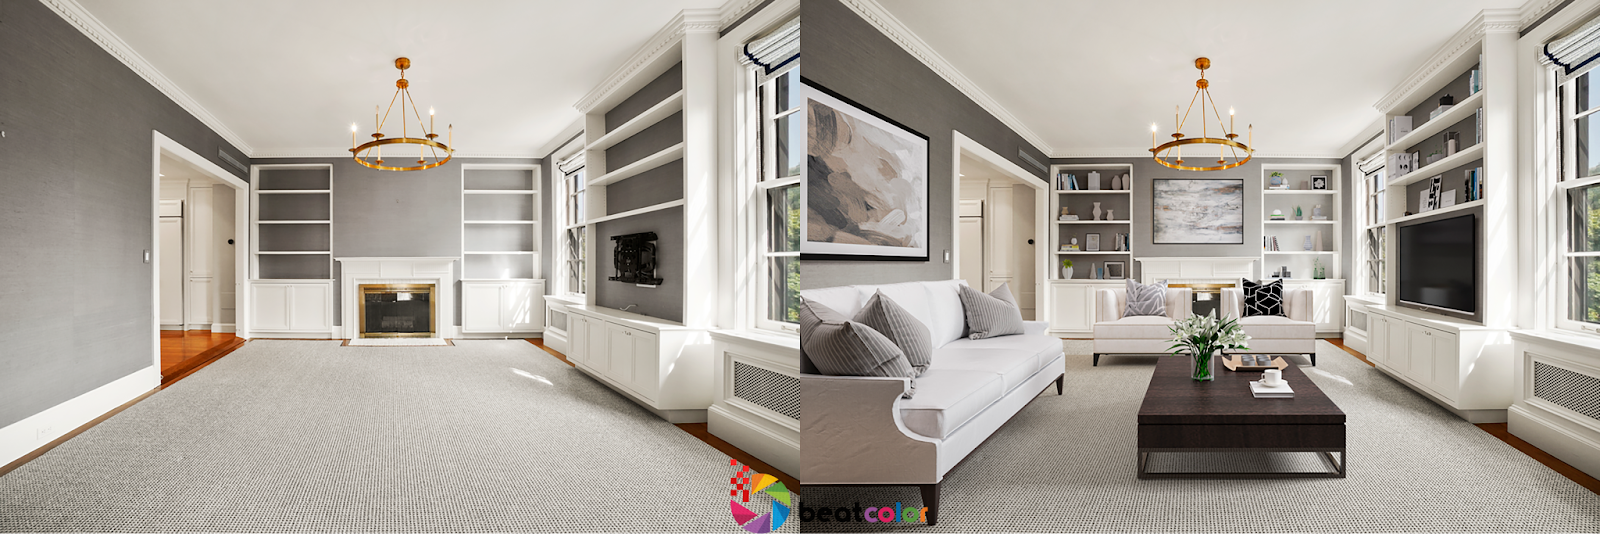 real estate photo editing beatcolor 